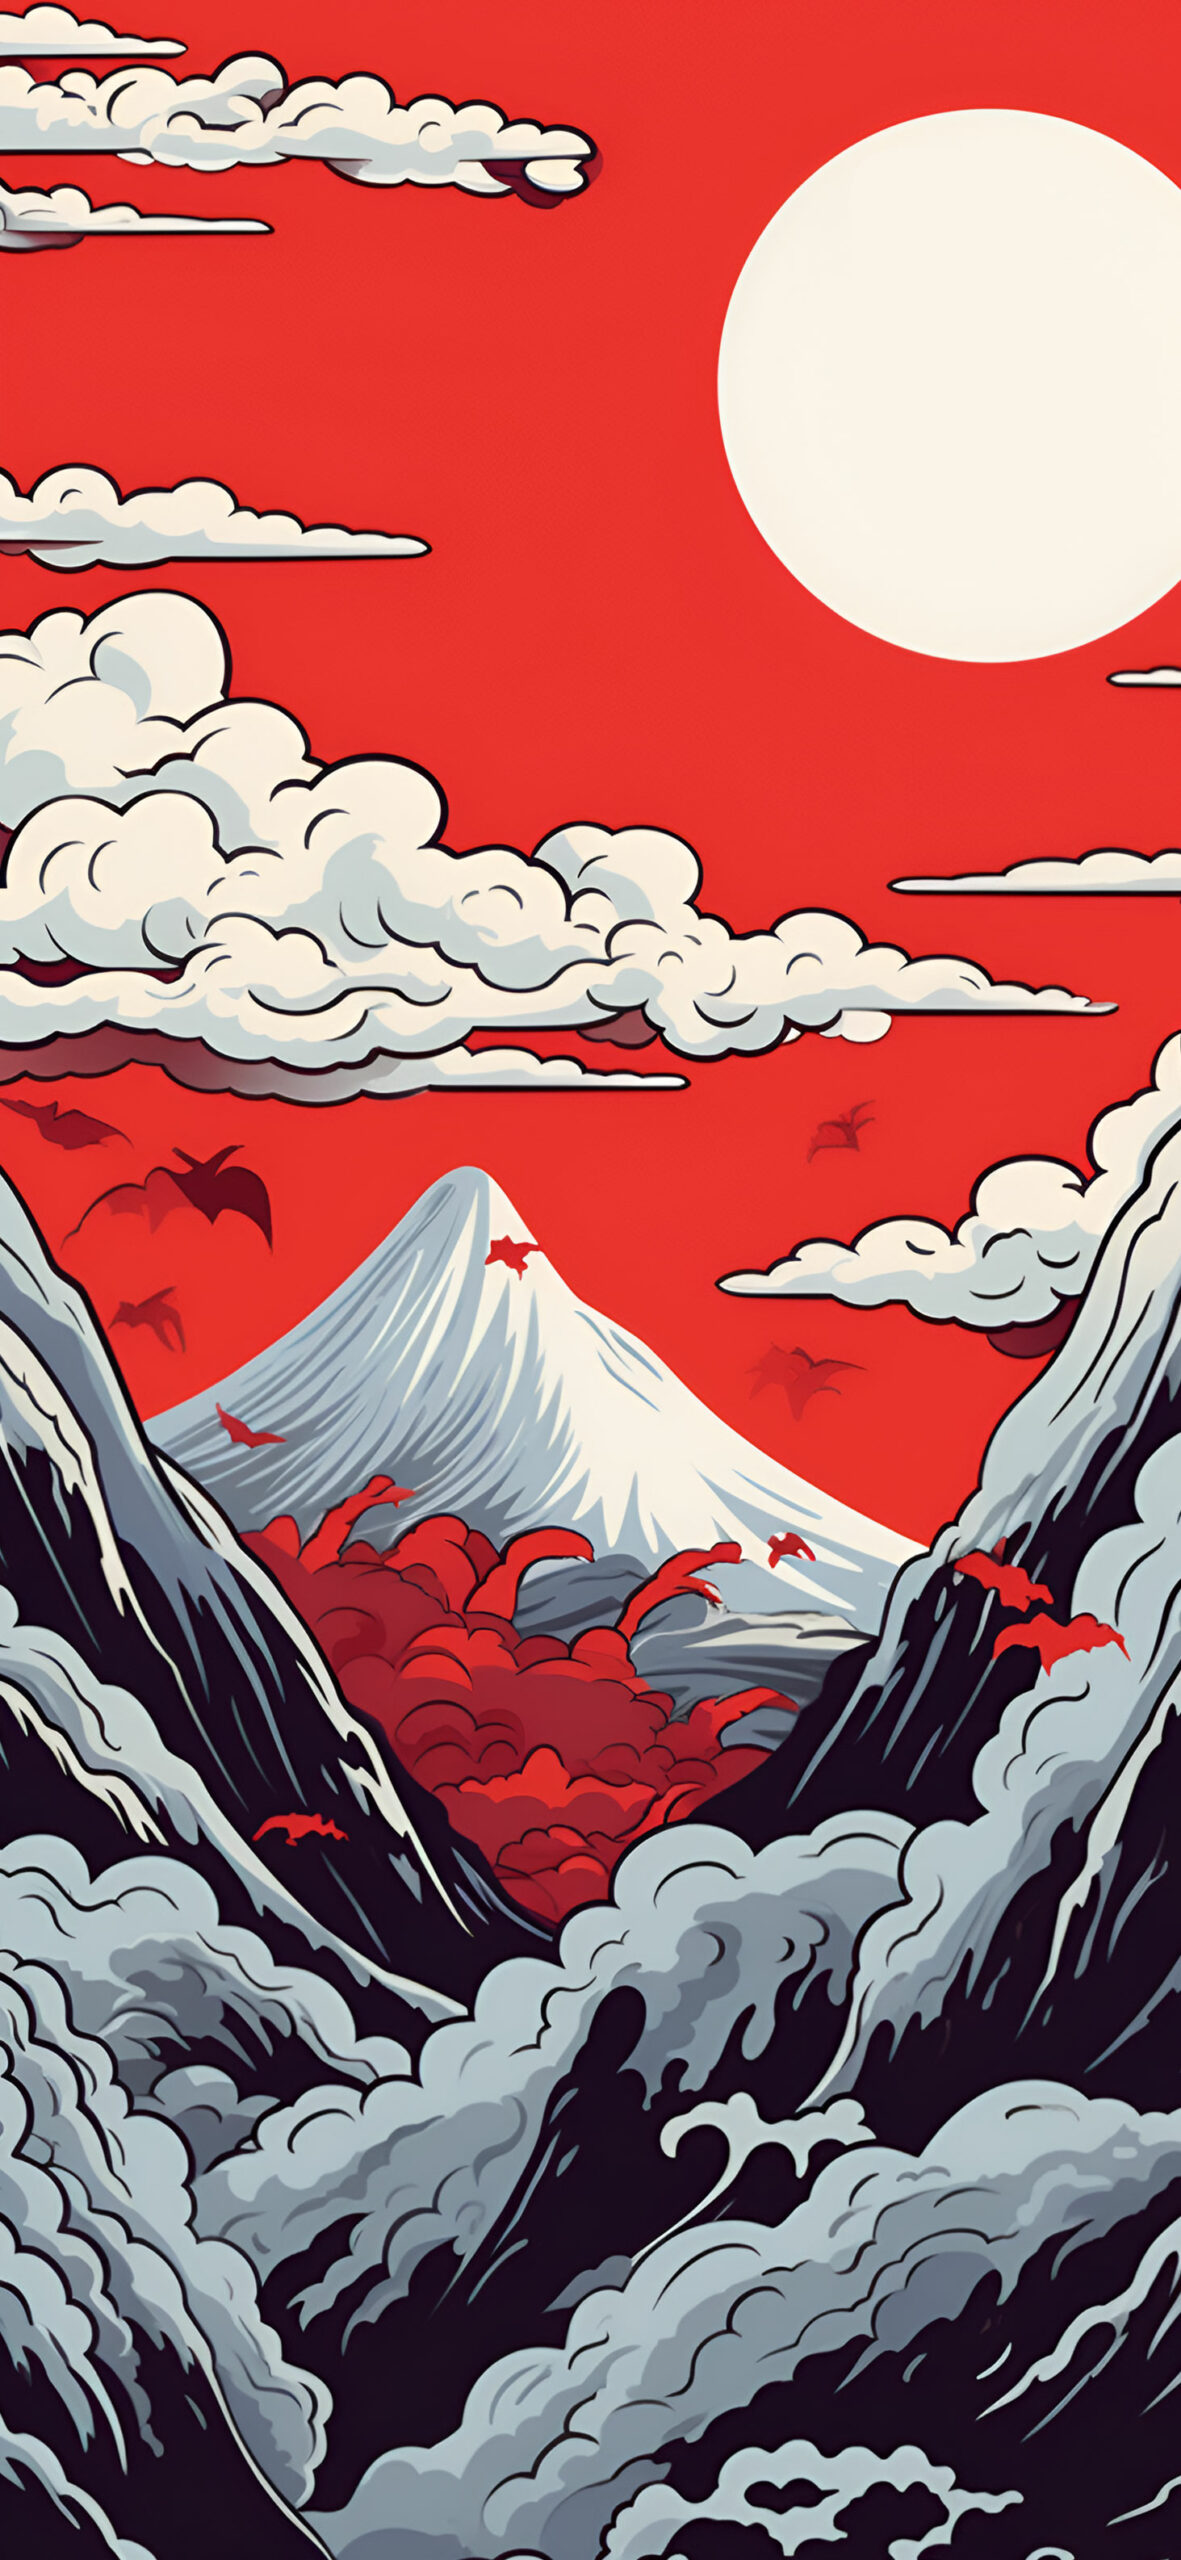 Mountains & Clouds Japanese Aesthertic Wallpaper red Japanese